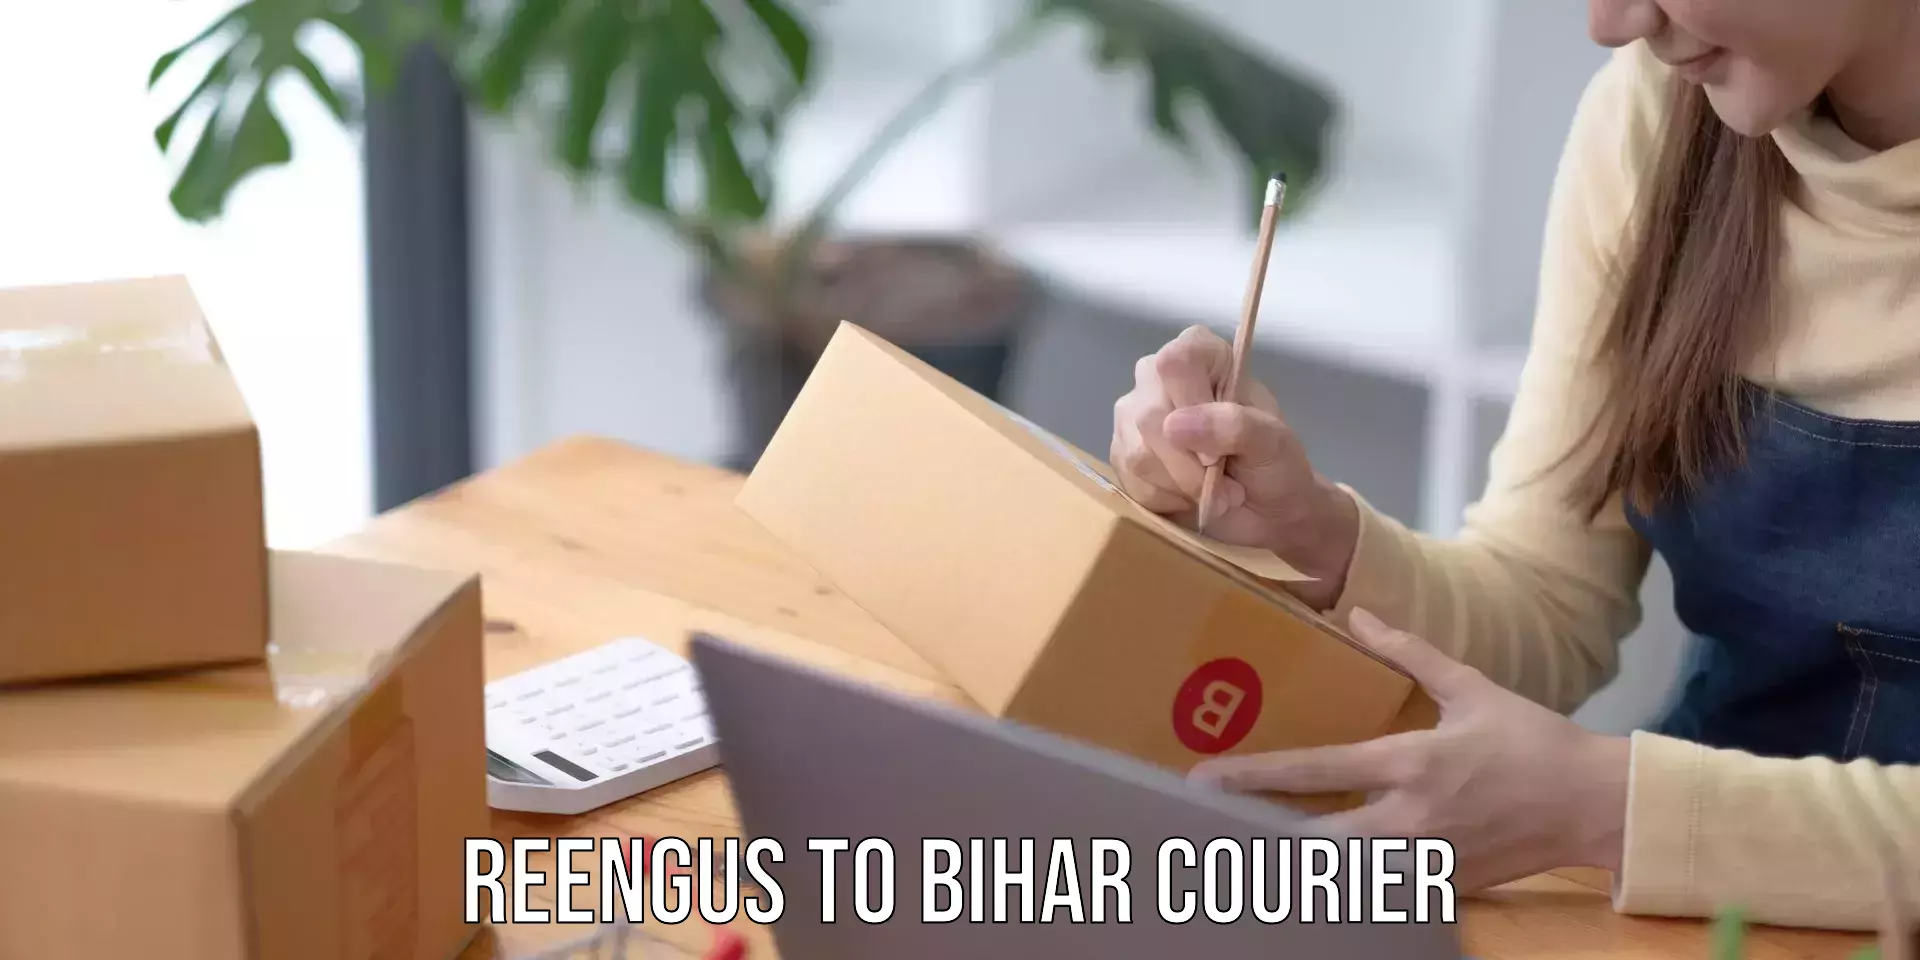 Easy access courier services in Reengus to Bihar